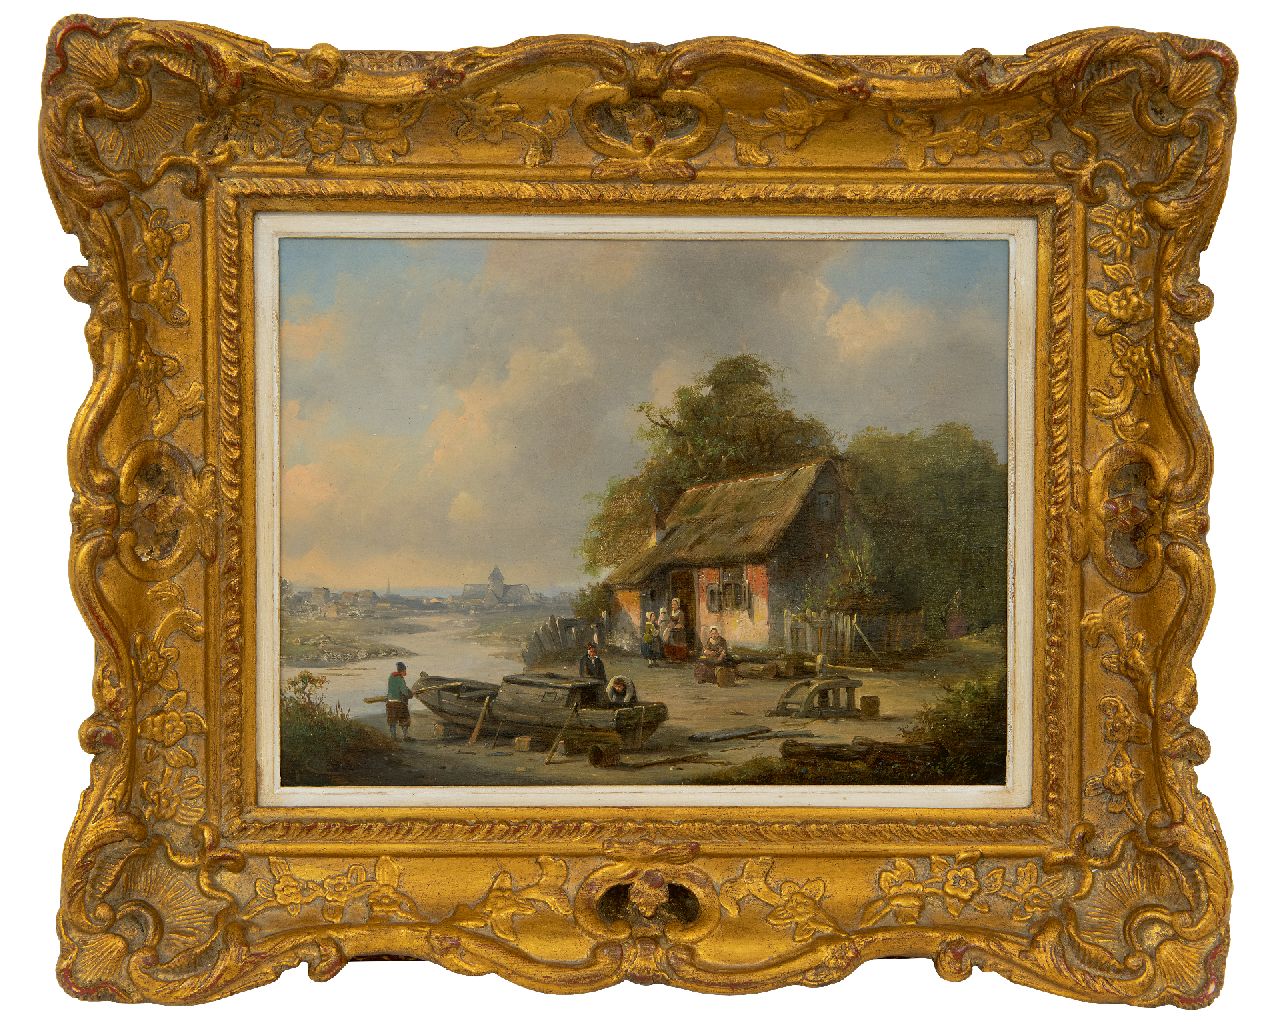 Carabain J.F.J.  | 'Jacques' François Joseph Carabain | Paintings offered for sale | A river landscape with a cottage and shipyard, oil on panel 19.3 x 25.3 cm, signed l.l.